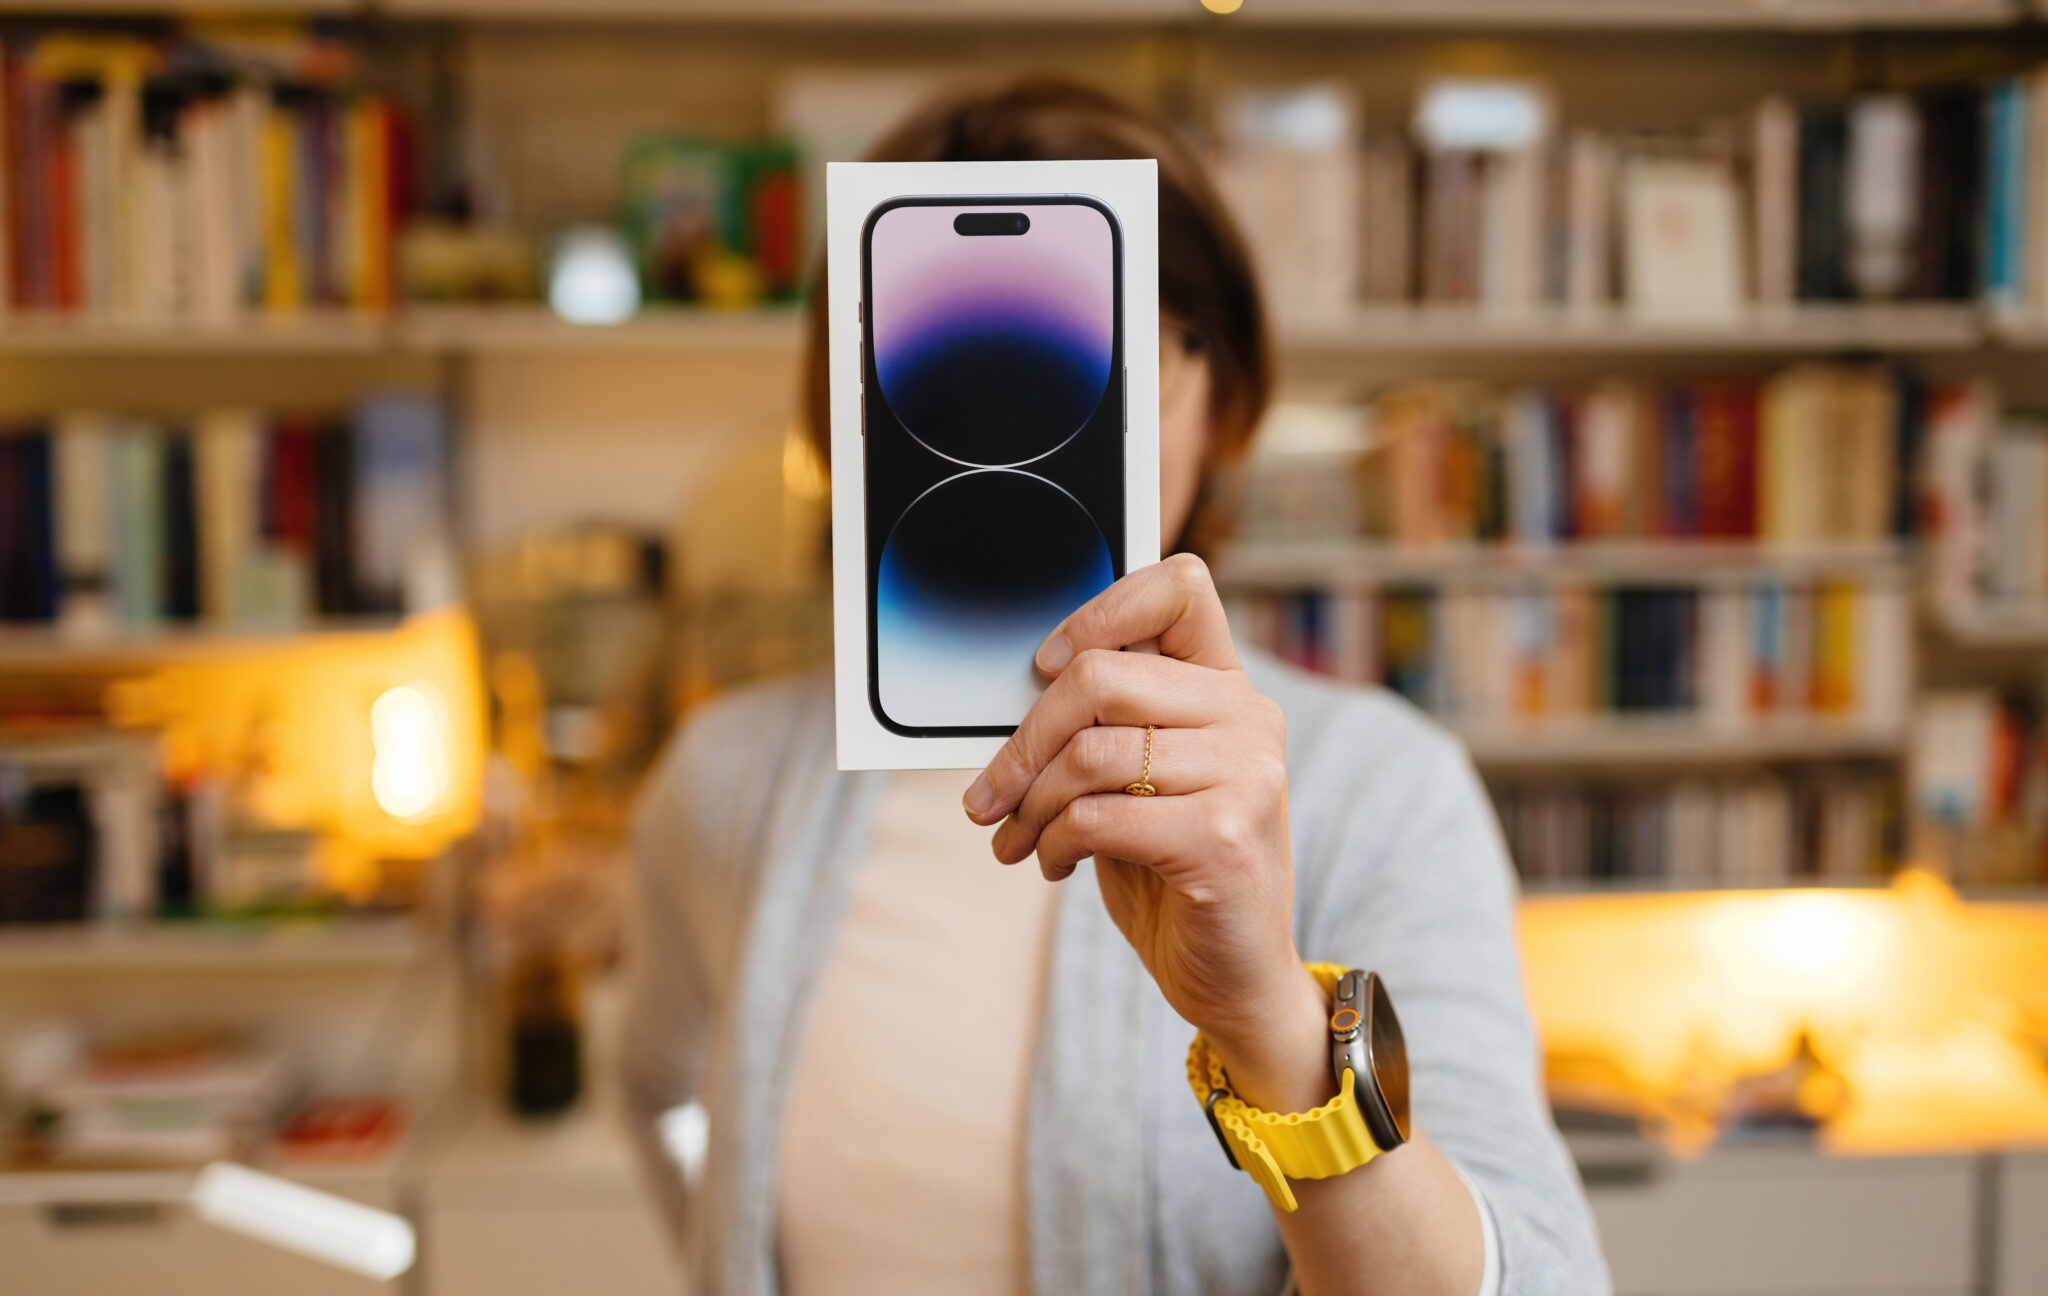 A woman holds up an iPhone for repair in front of a bookcase.